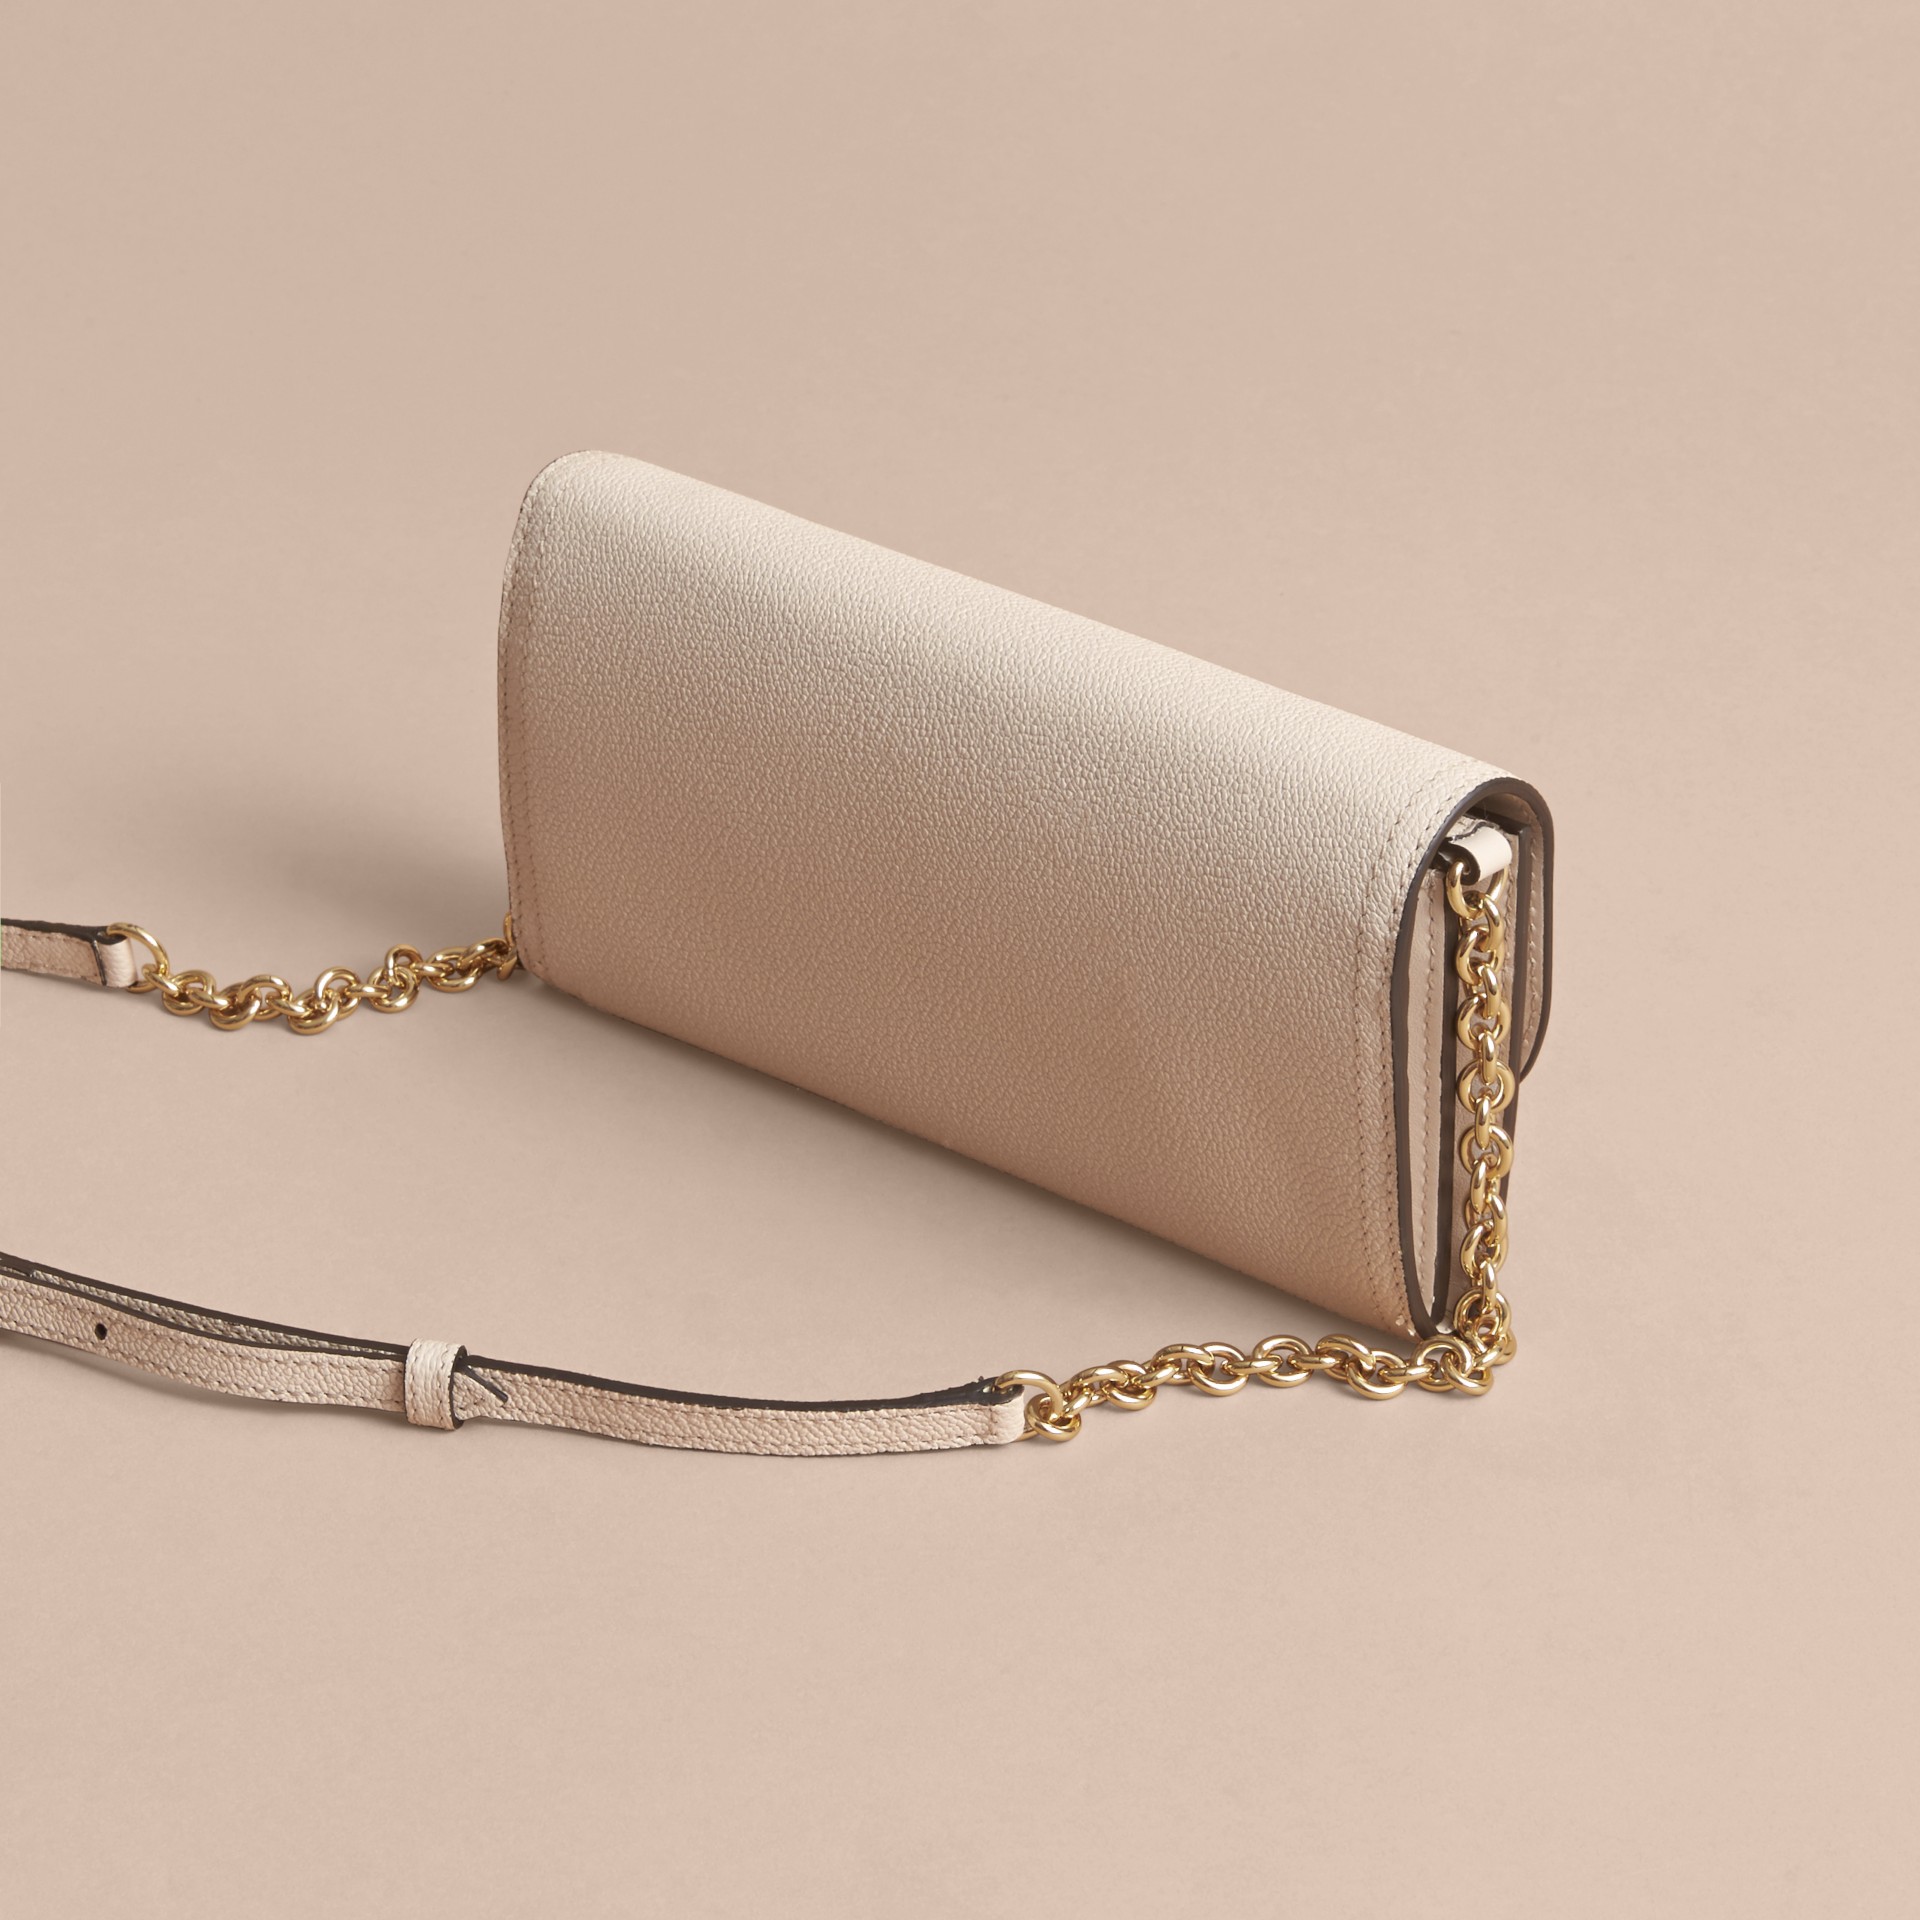 Leather Wallet with Chain in Limestone - Women | Burberry United States